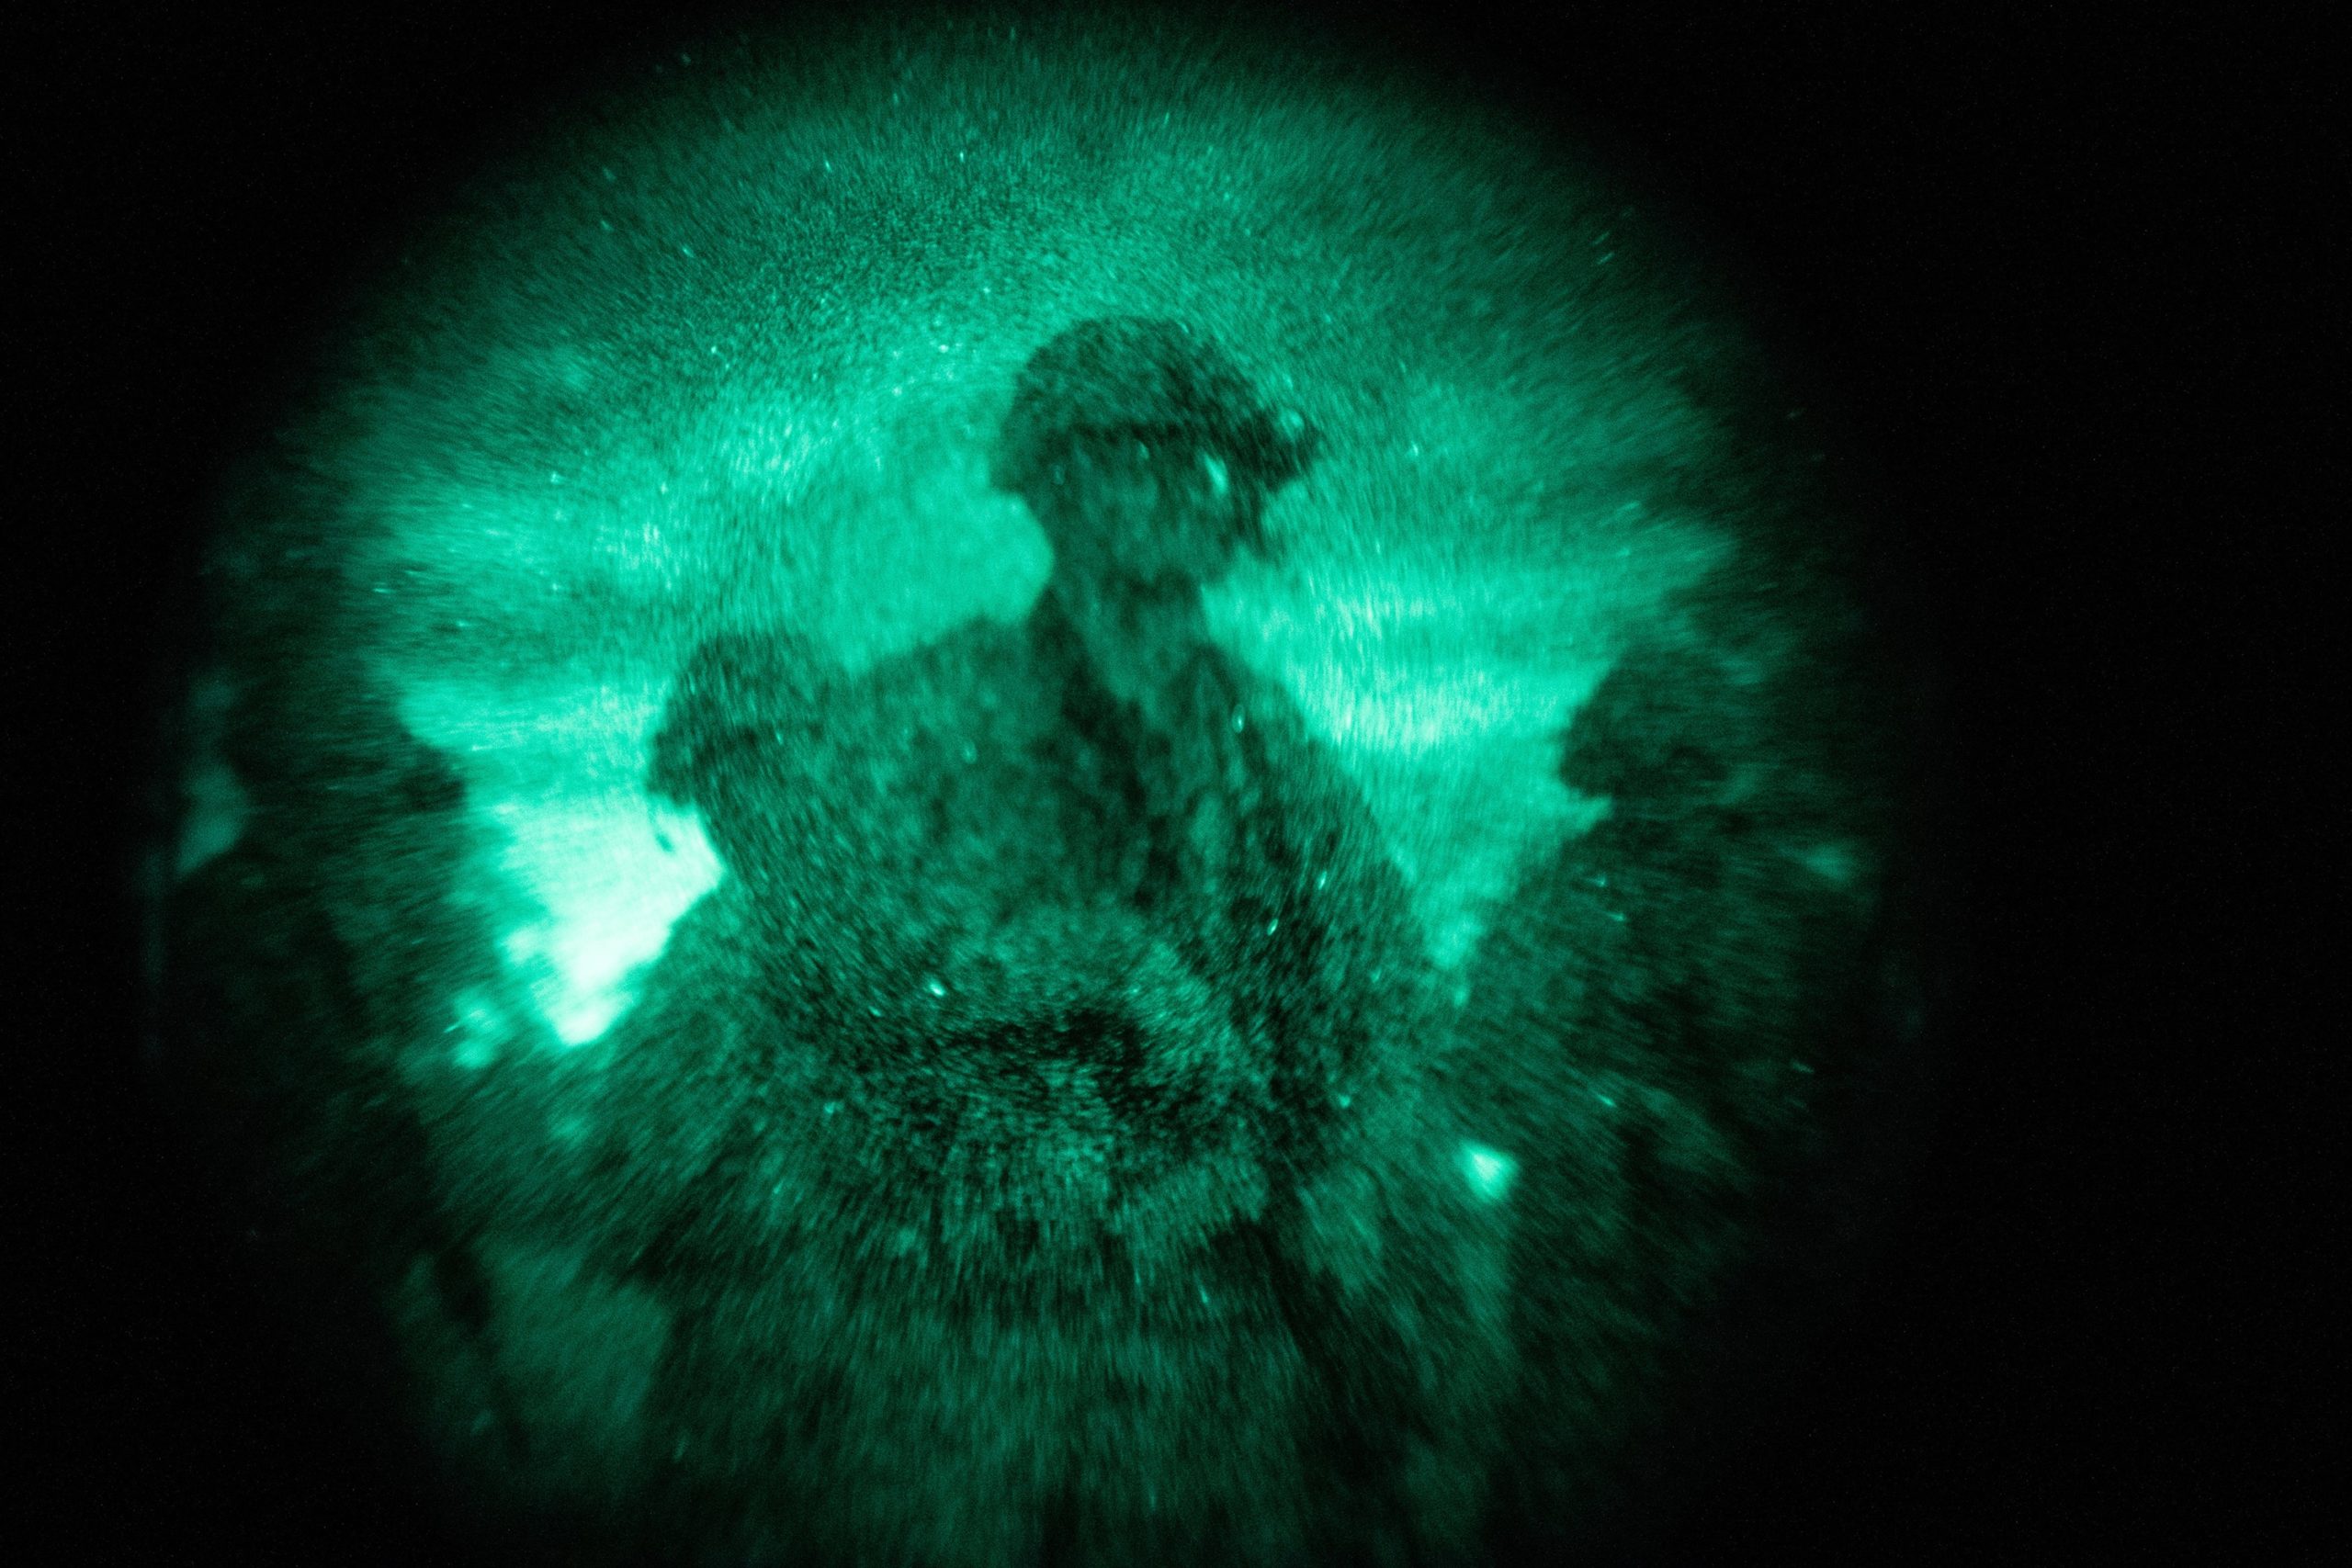 Marines attending the Special Operations Forces Fundamentals course, Marine Raider Training Center, execute a night ambush while patrolling at Marine Corps Base Camp Lejeune, N.C., Dec. 11, 2020. SOF Fundamentals is designed to equip high-performing Marines with additional skills and concepts required to be effective in special operations and provide combat support expertise in intelligence, fire support, communications, explosive ordinance disposal and canine operations as part of a Marine Special Operations Team. (U.S. Marine Corps photo by Cpl. Brennan Priest)